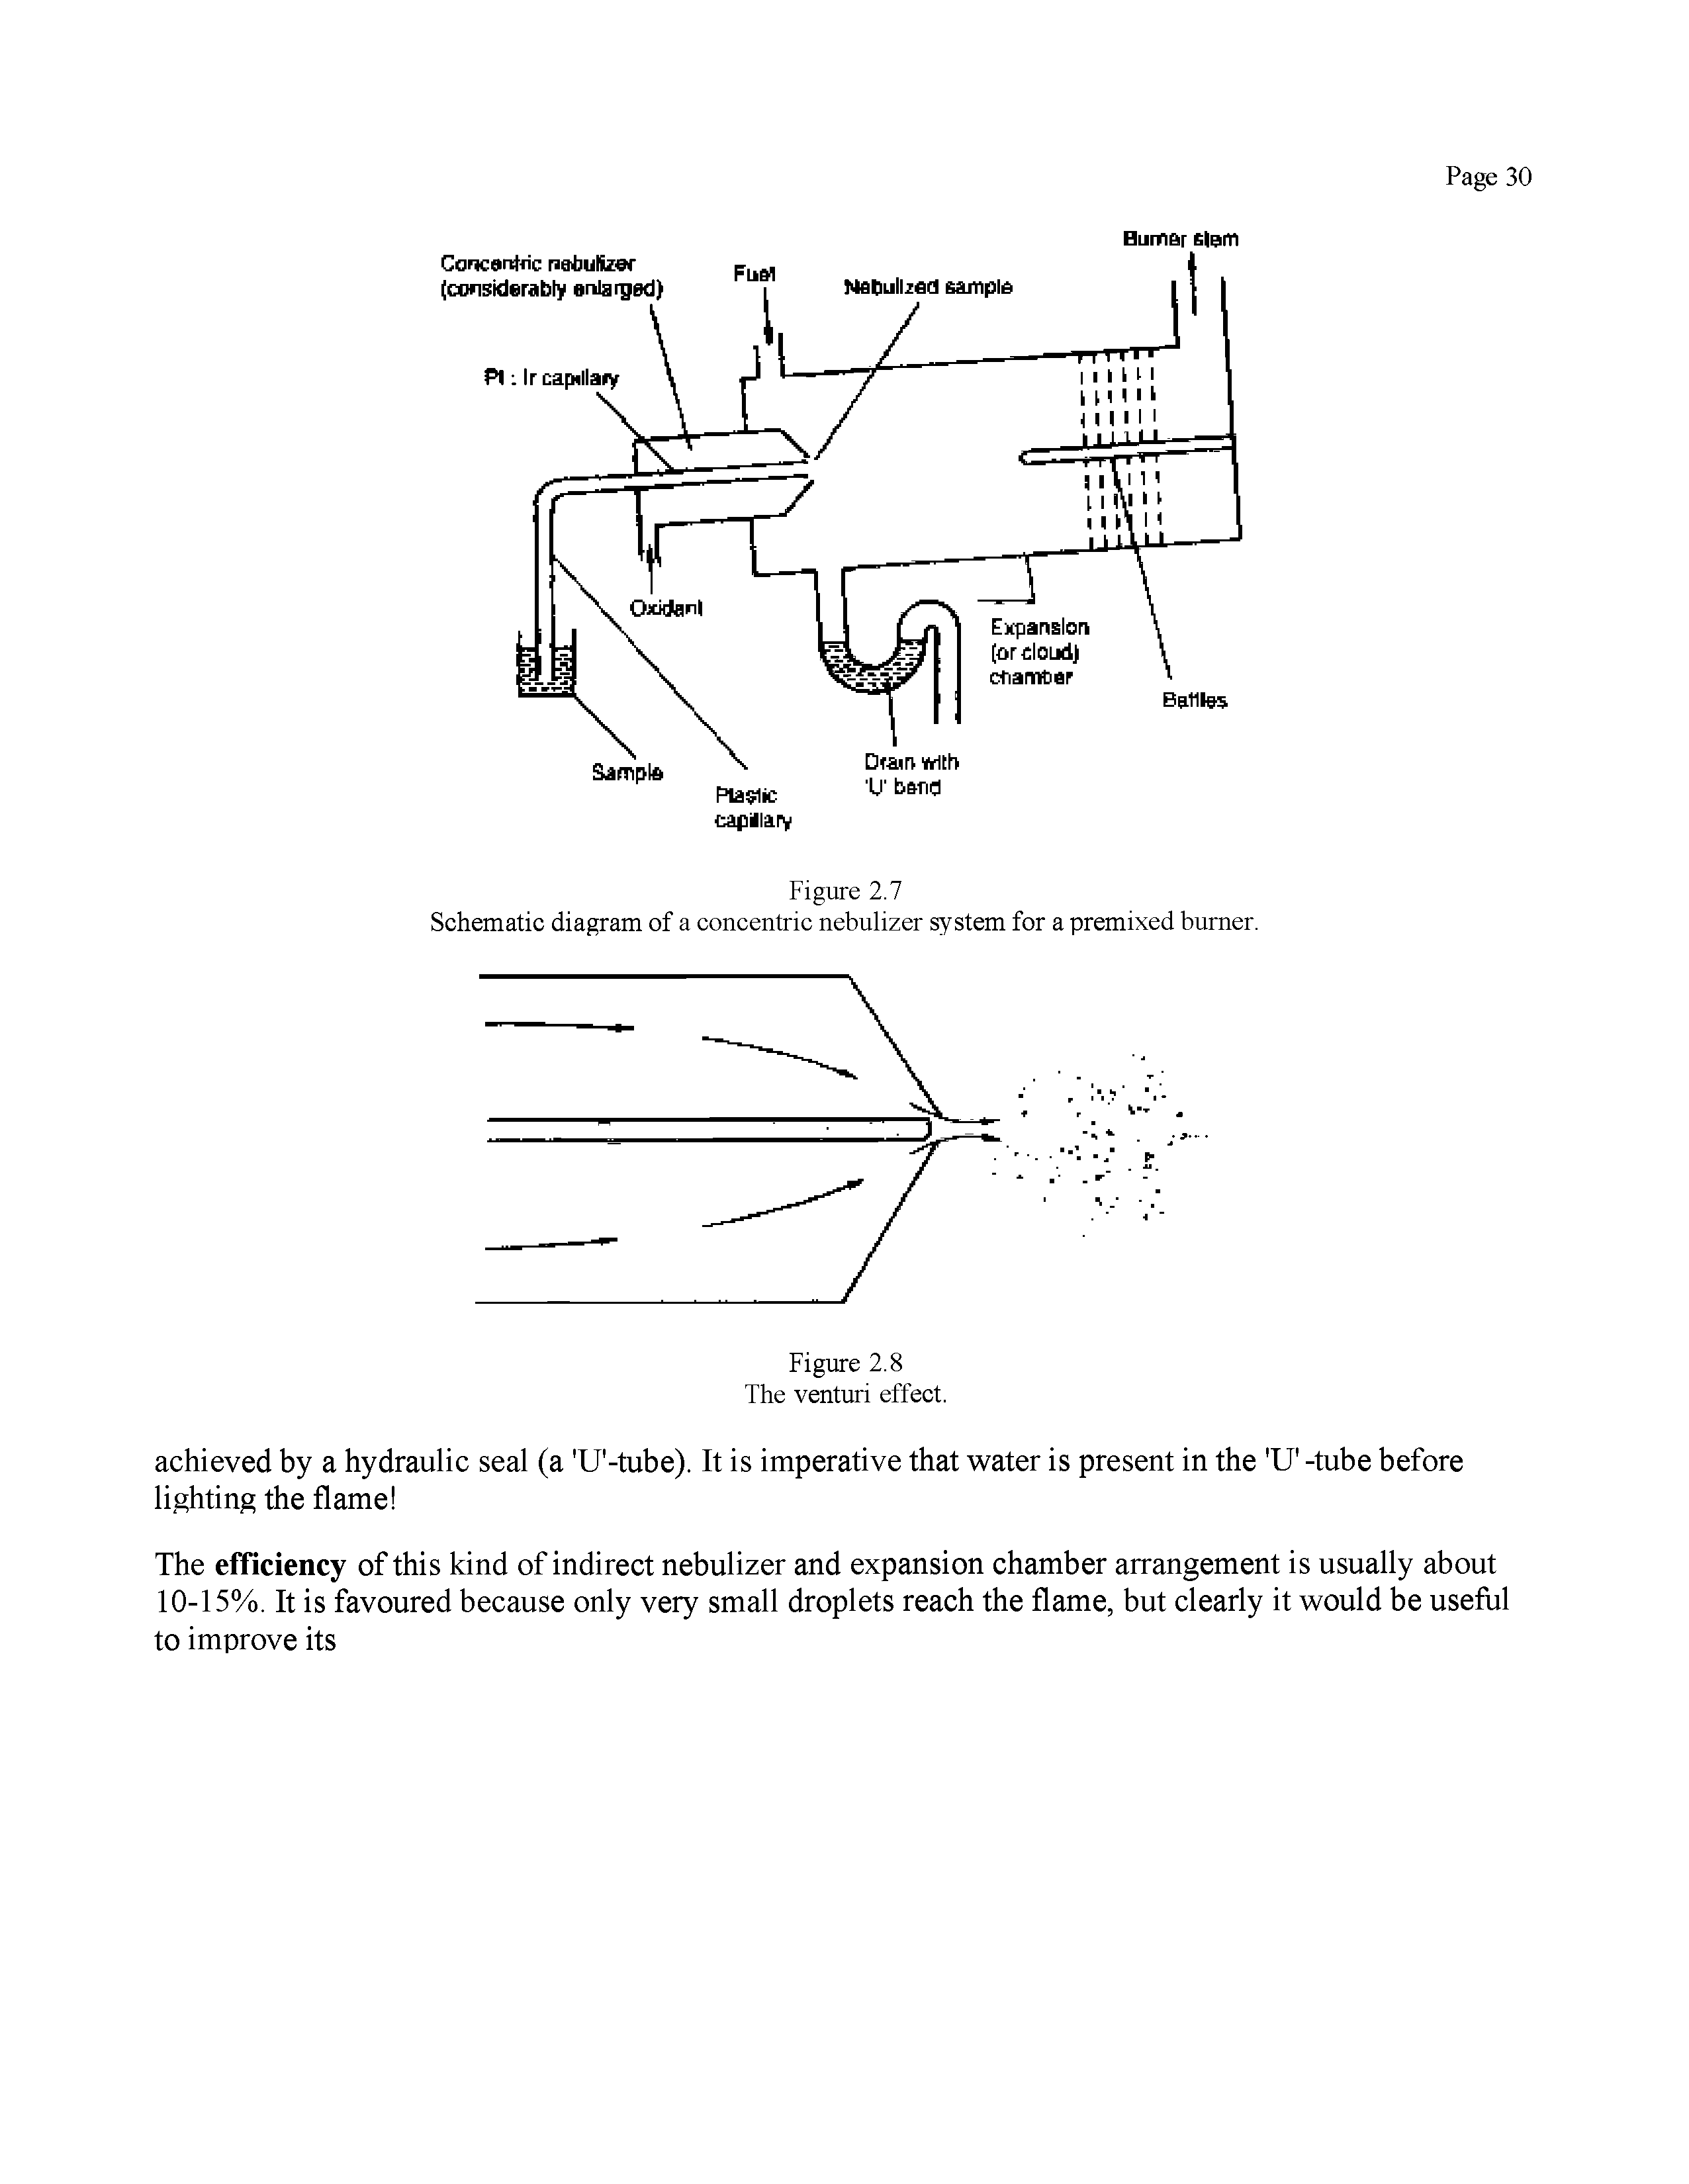 Schematic diagram of a concentric nebulizer system for a premixed burner.